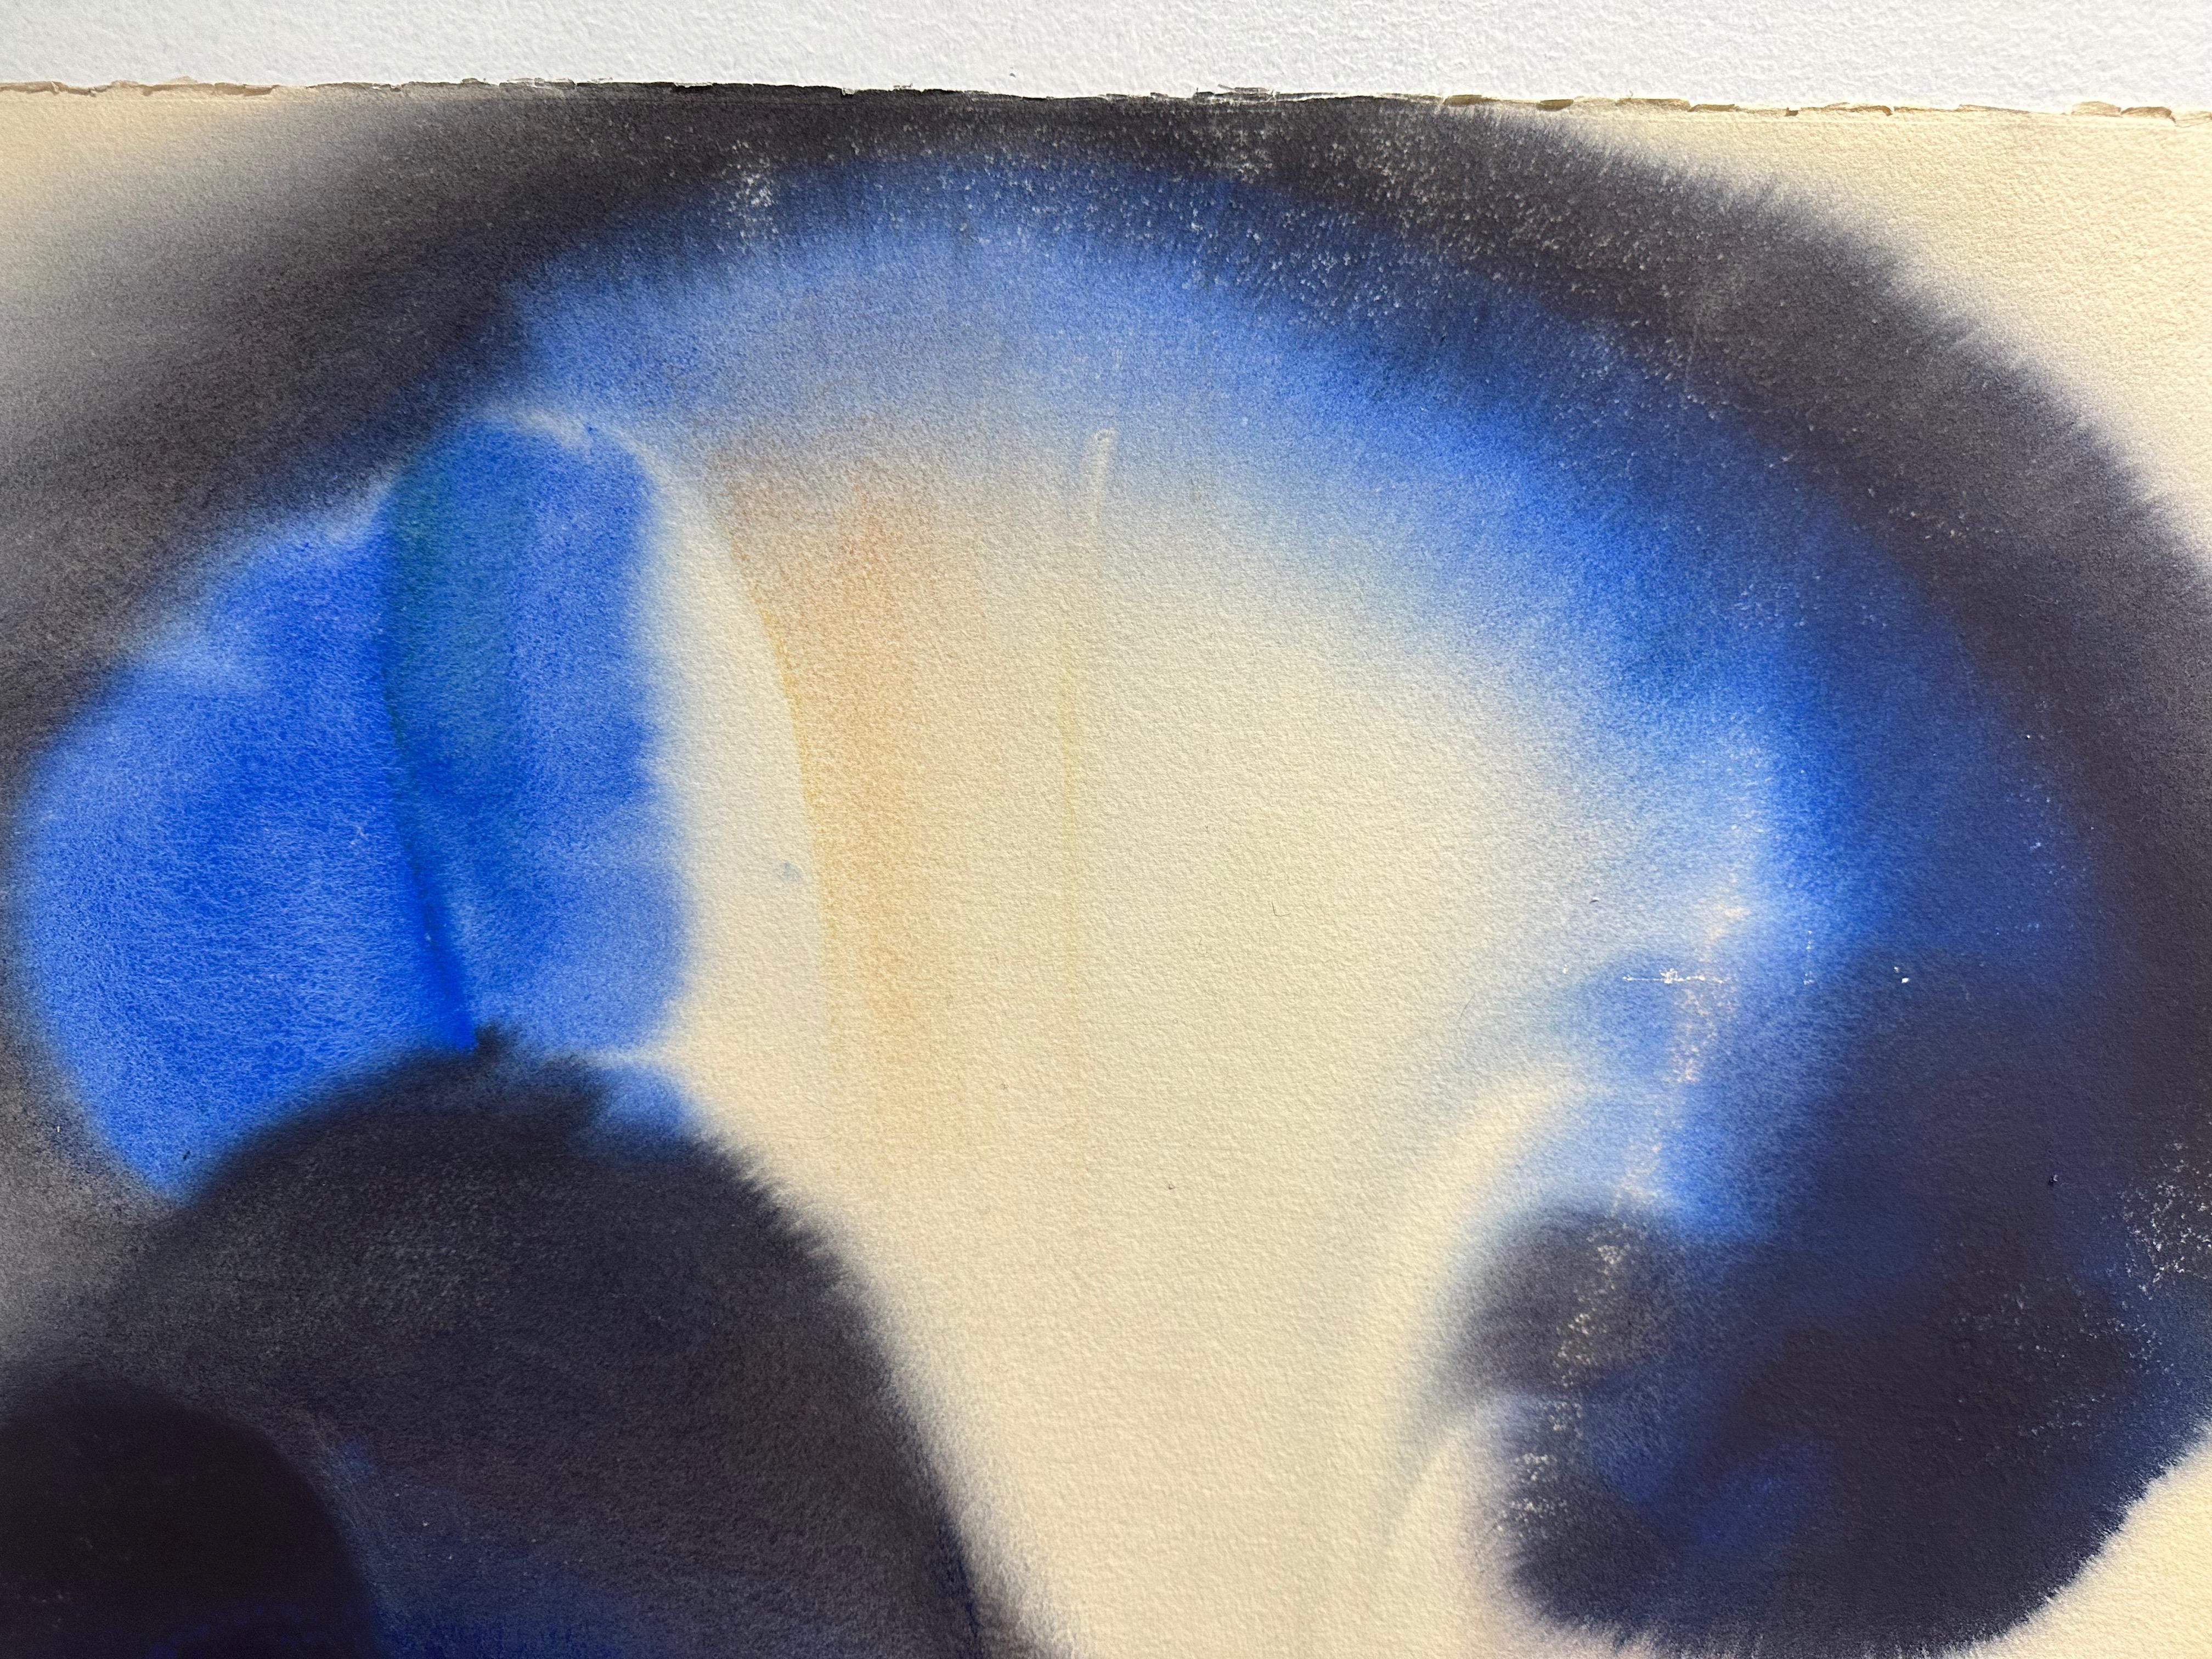  Untitled Blue Abstract
Abstract watercolor on French Arches rag paper artist signed, it can be frame before shipping or ship rolled up.
Frank Monaco.
Studied and worked with Marilyn Stiles of The Art Institute of Chicago/ Art History
Painting,